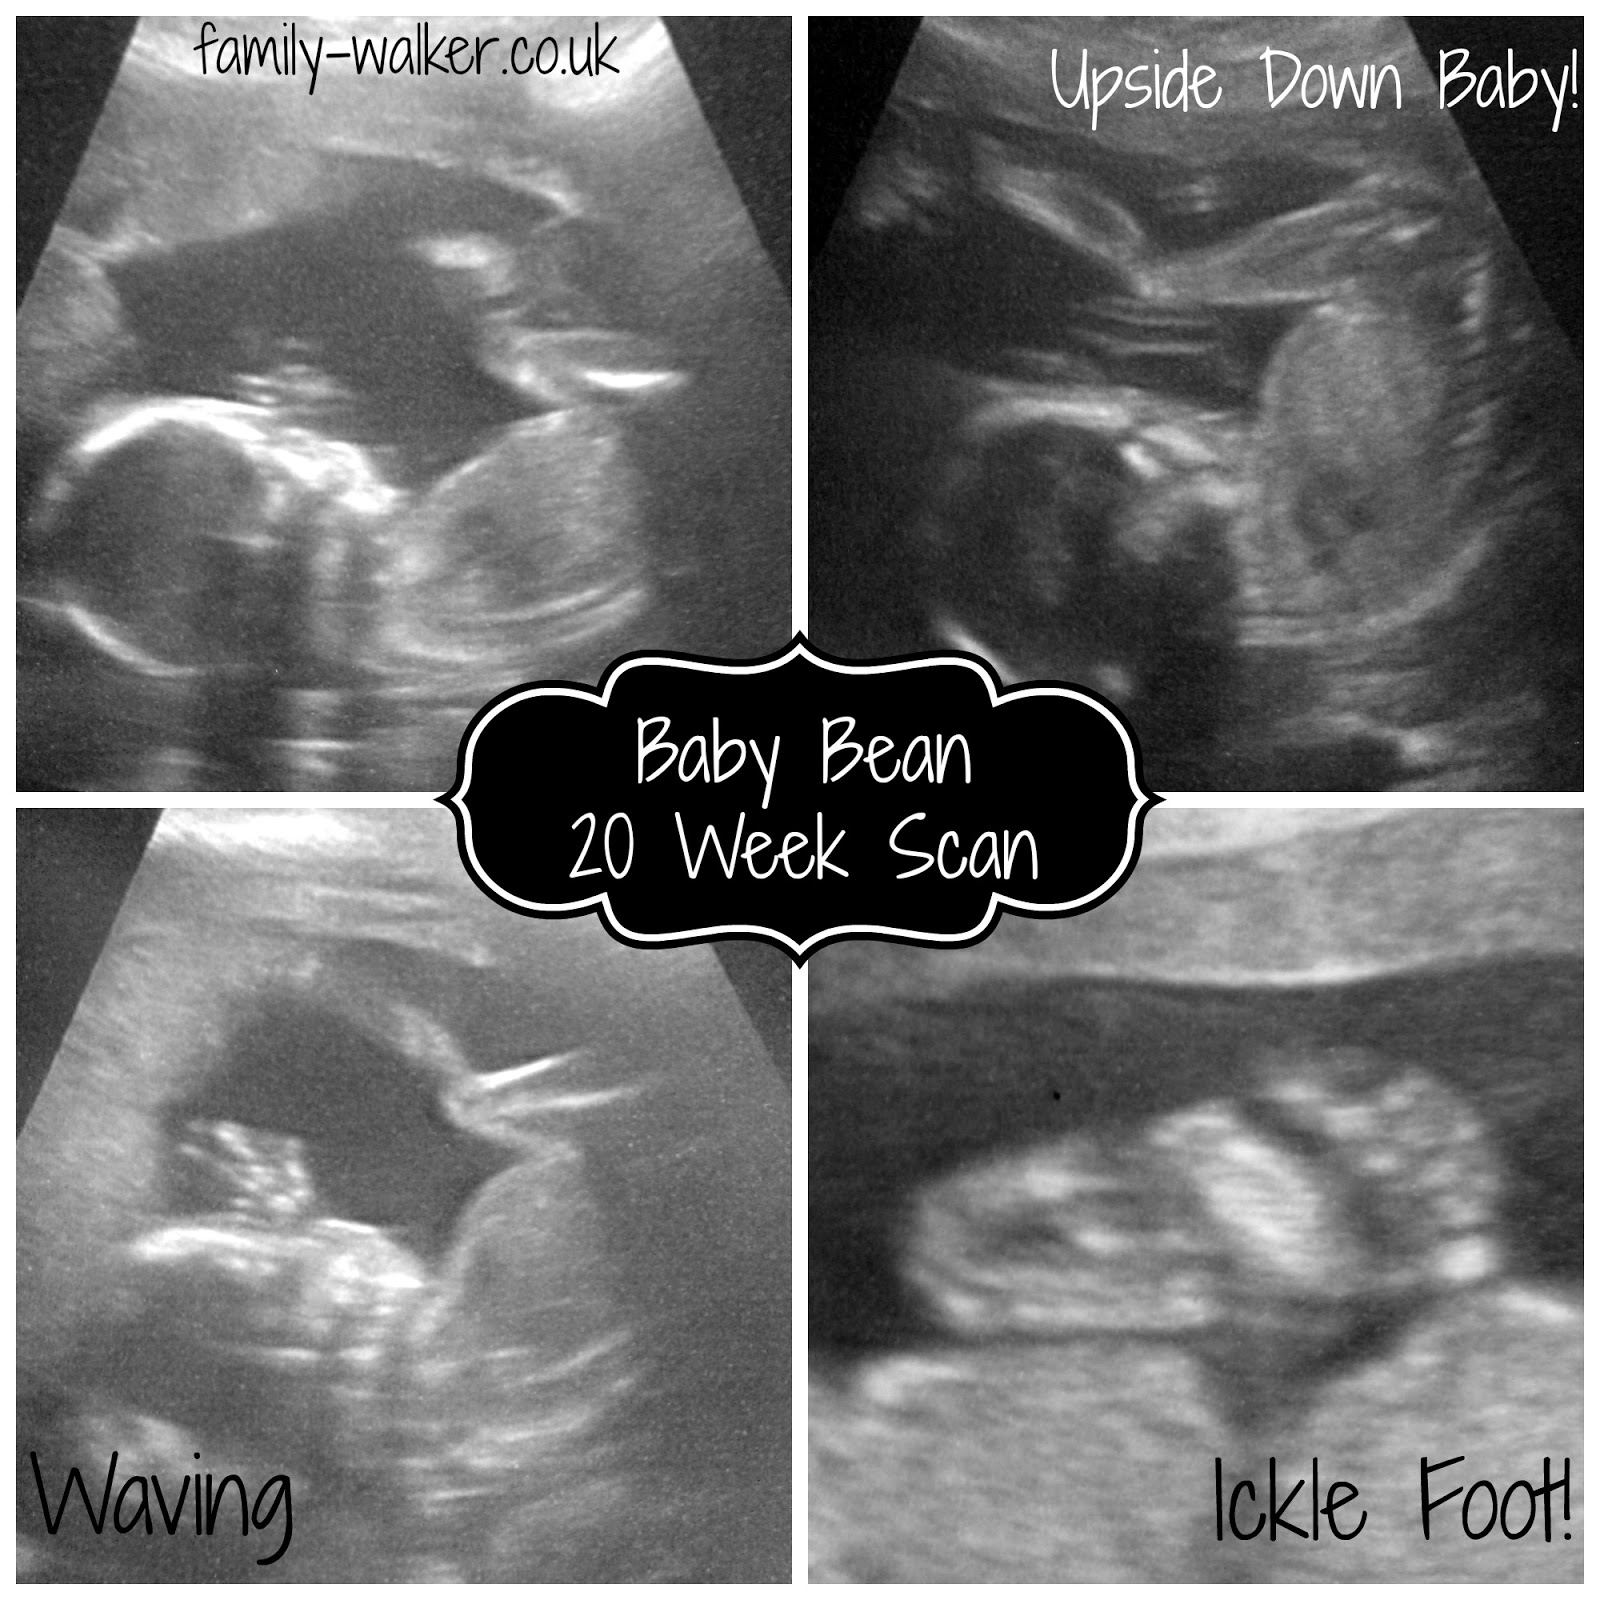 "Baby Bean" - 20 week scan pictures